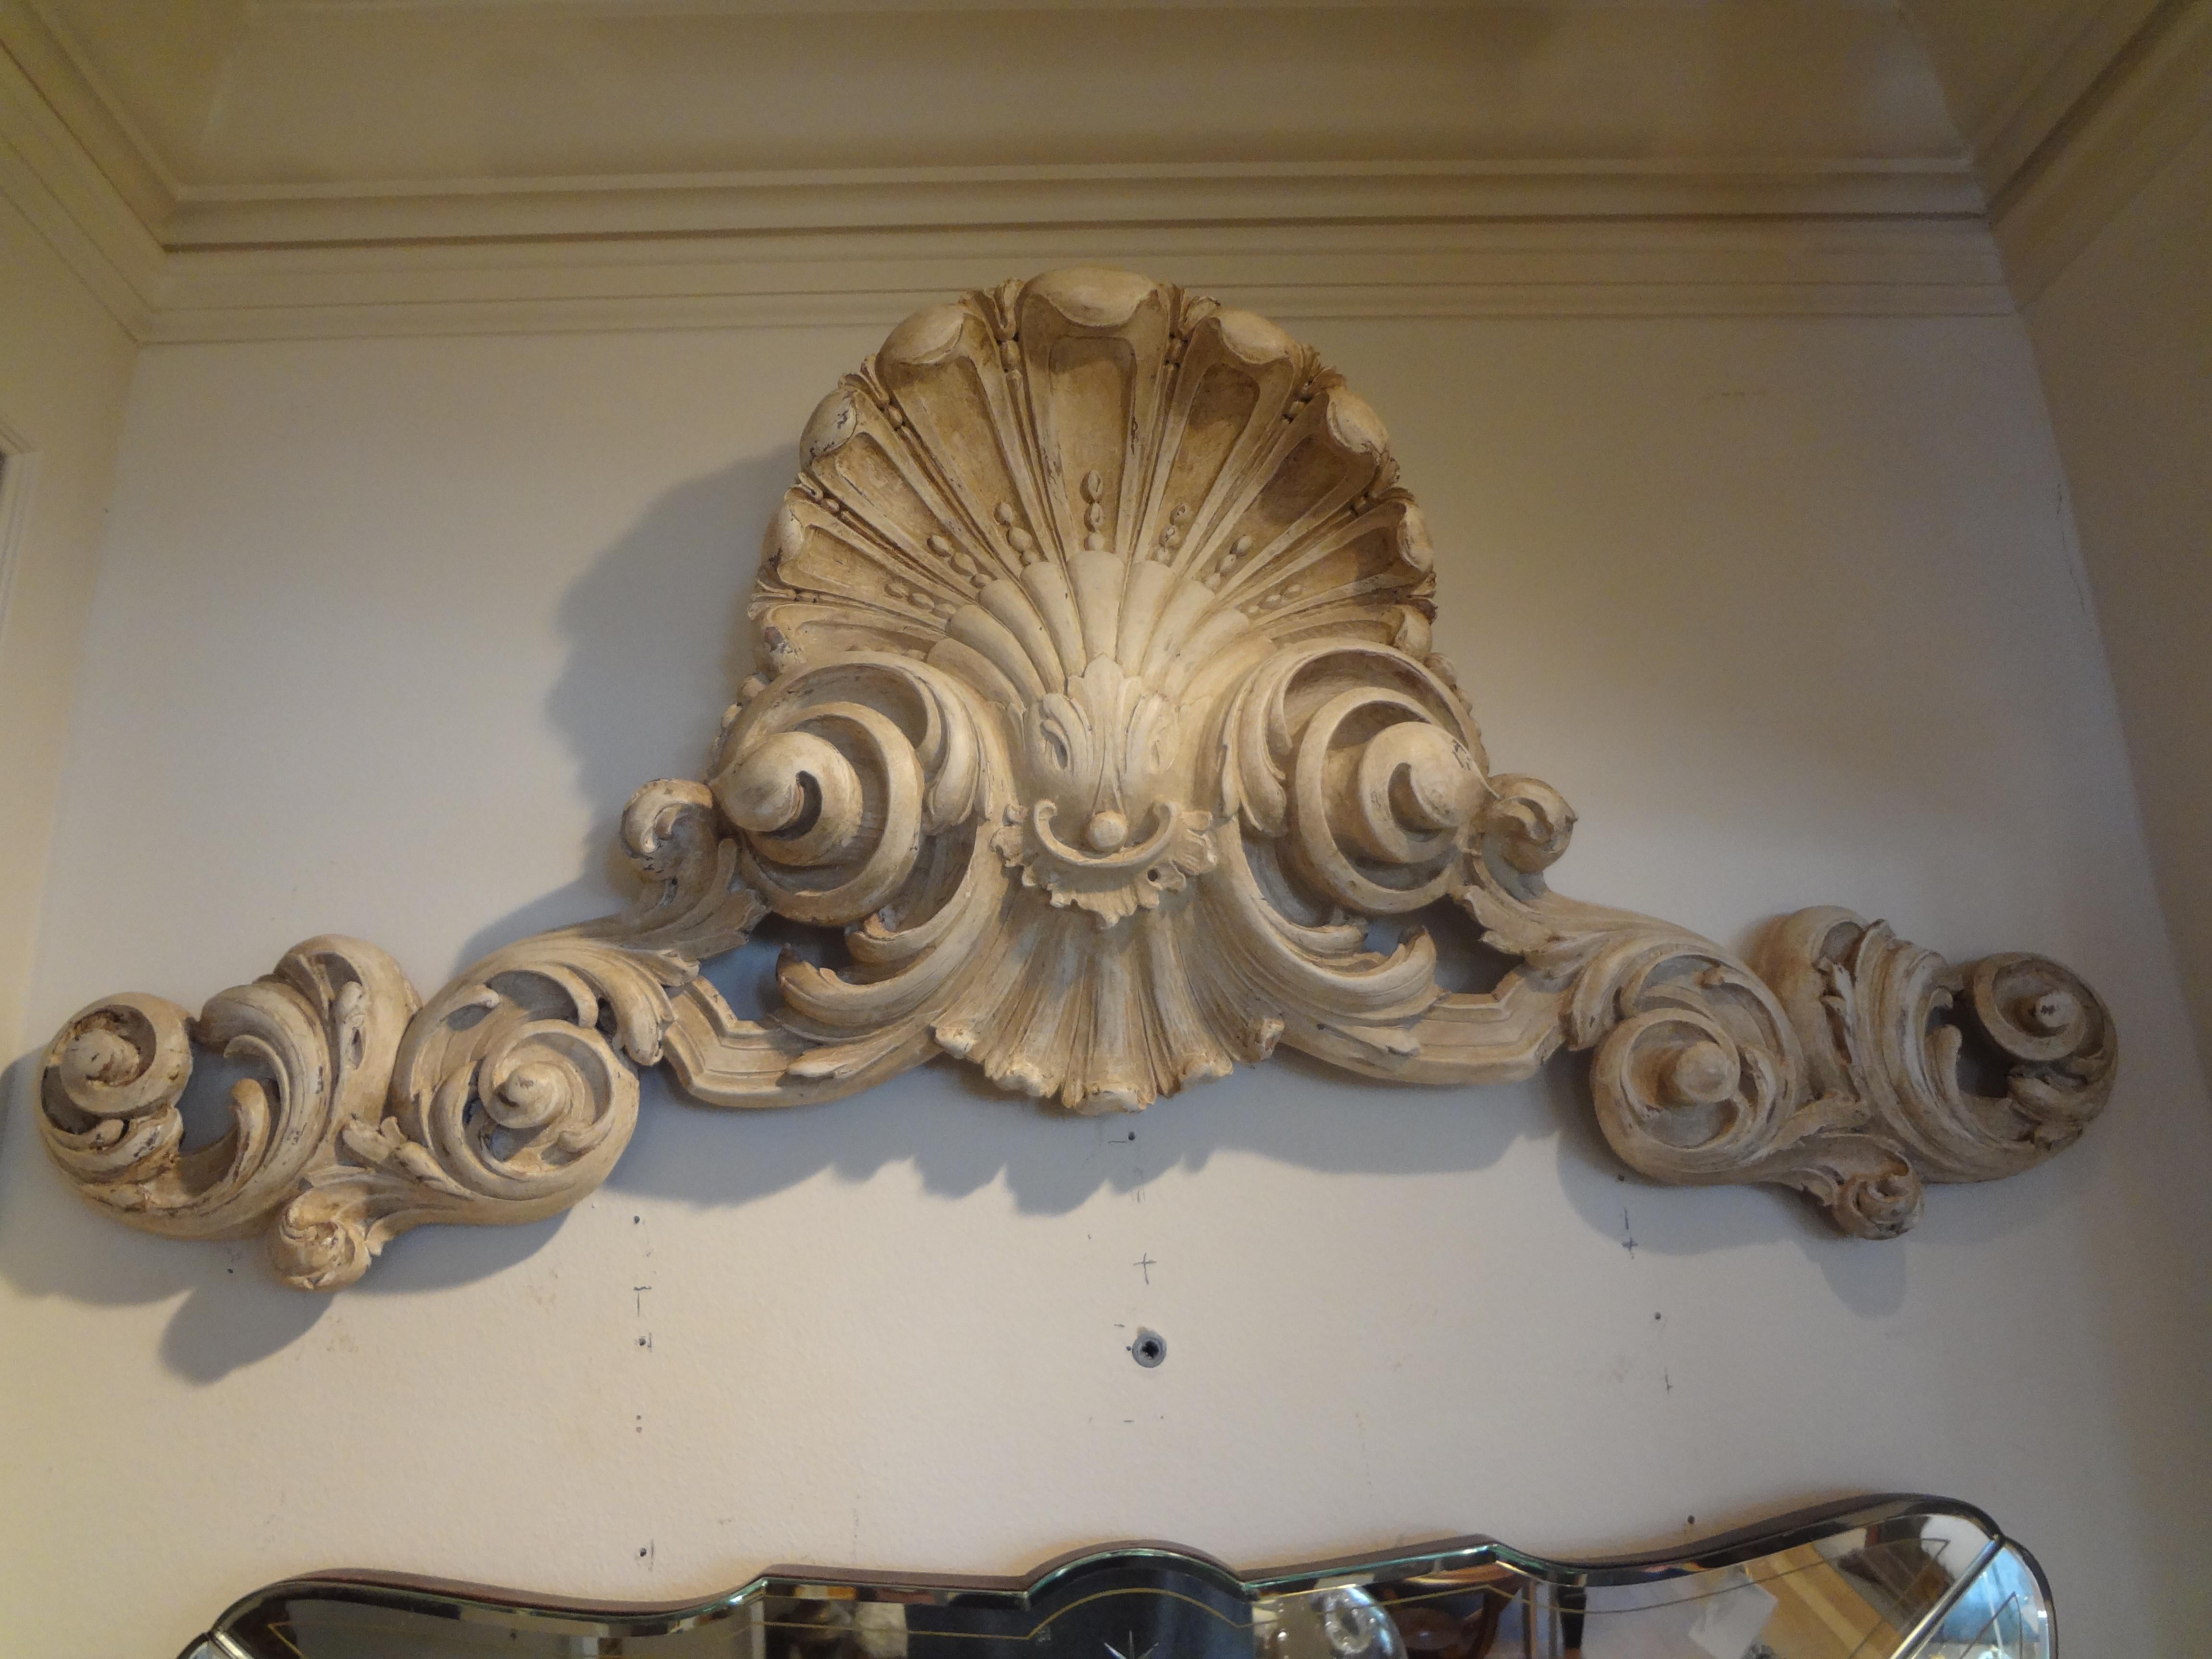 Well carved 19th century Italian architectural pediment. This Italian architectural element is painted a soft cream color and would look great above a doorway or used as a wall mounted sculpture.